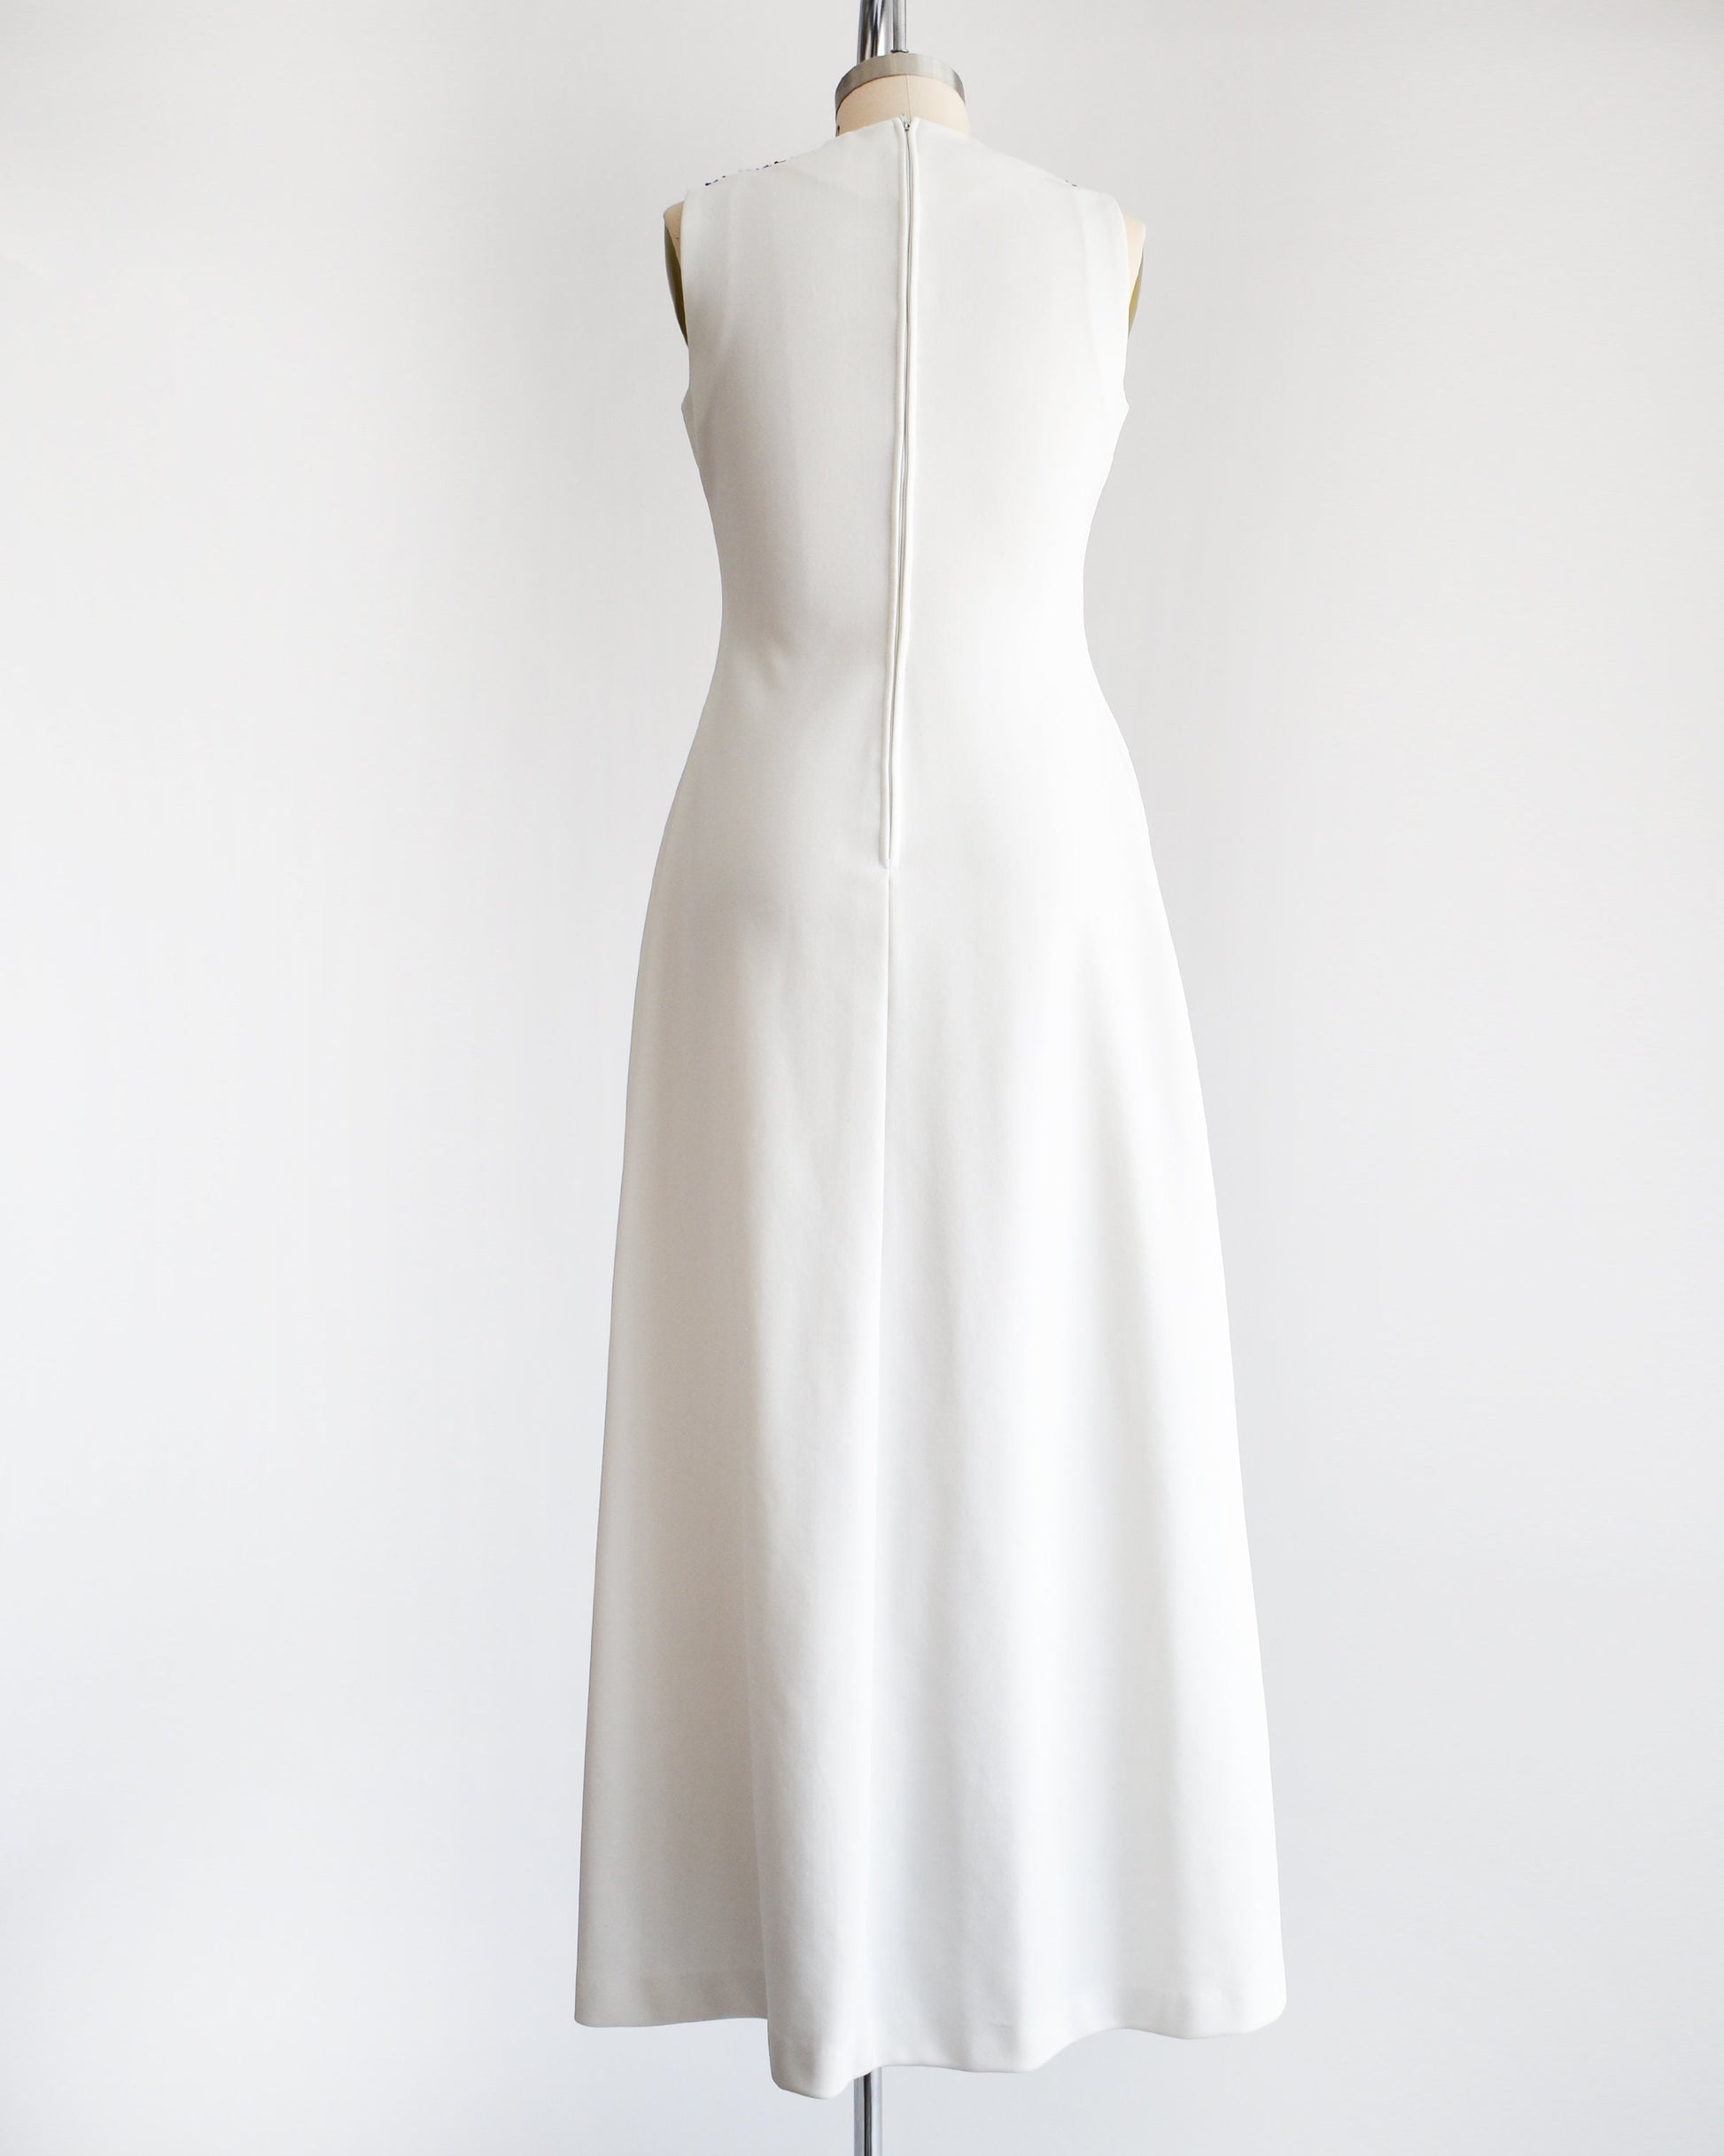 Back view of the dress which is a solid white and has a zipper up the back